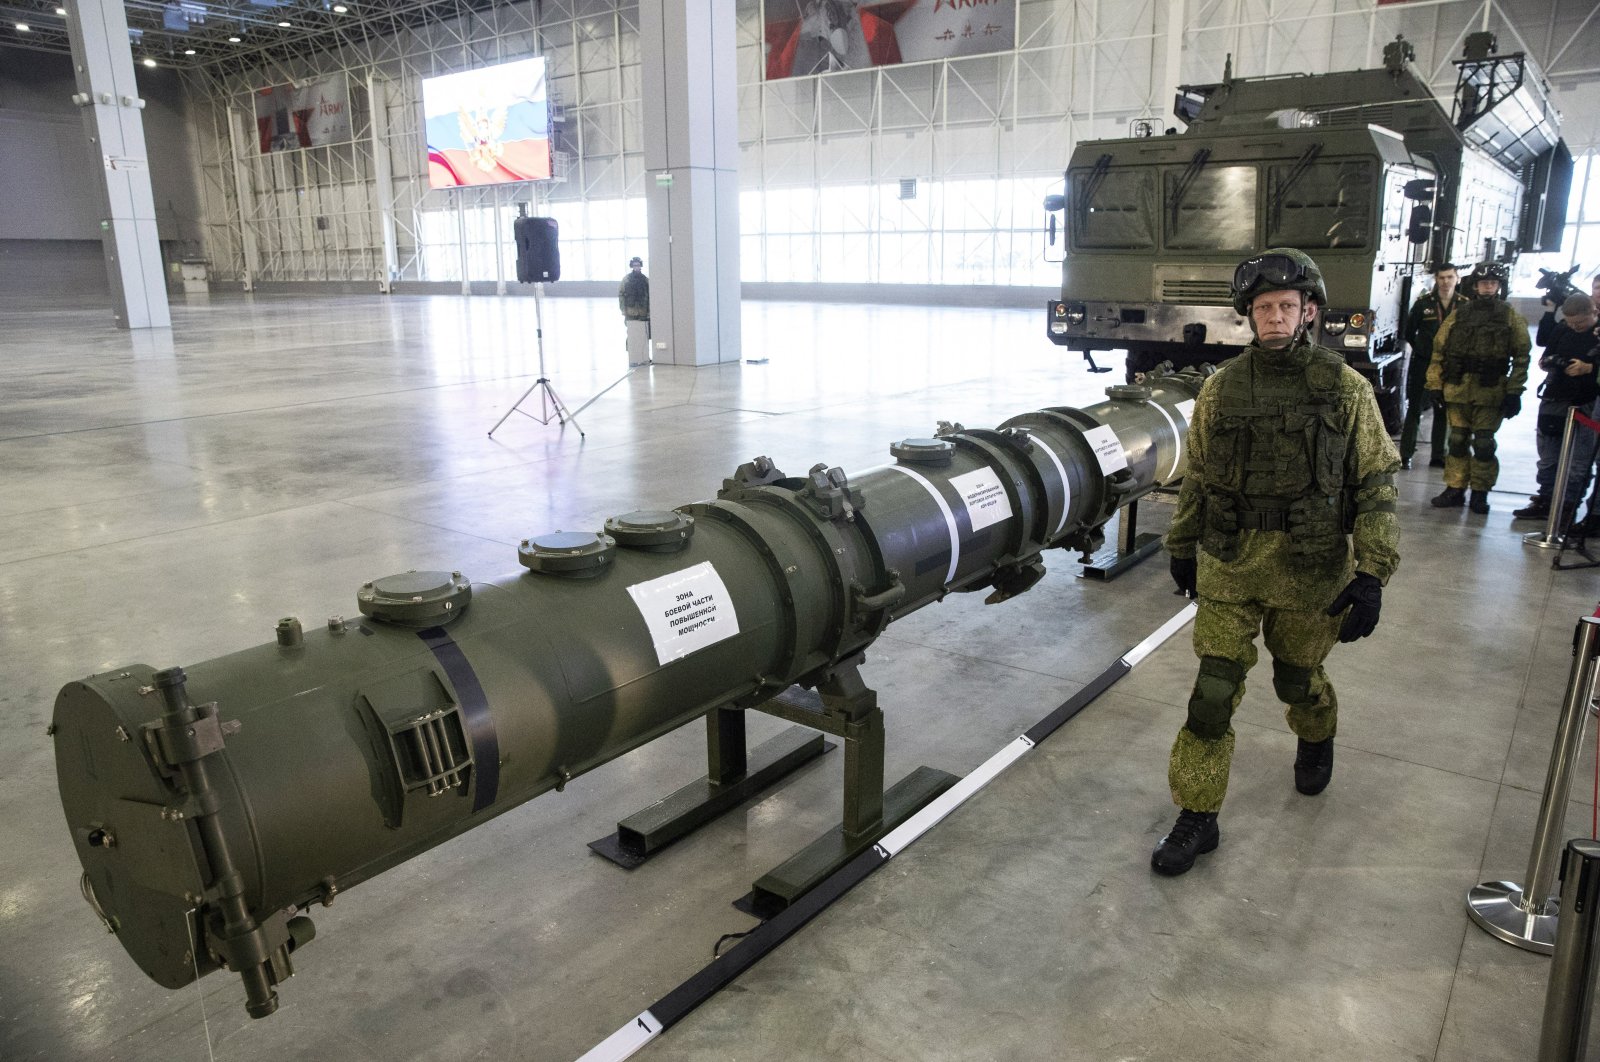 A Russian military officer walks past the 9M729 land-based cruise missile on display with its launcher, right, in Kubinka outside Moscow, Russia, Wednesday, Jan. 23, 2019. (AP File Photo)